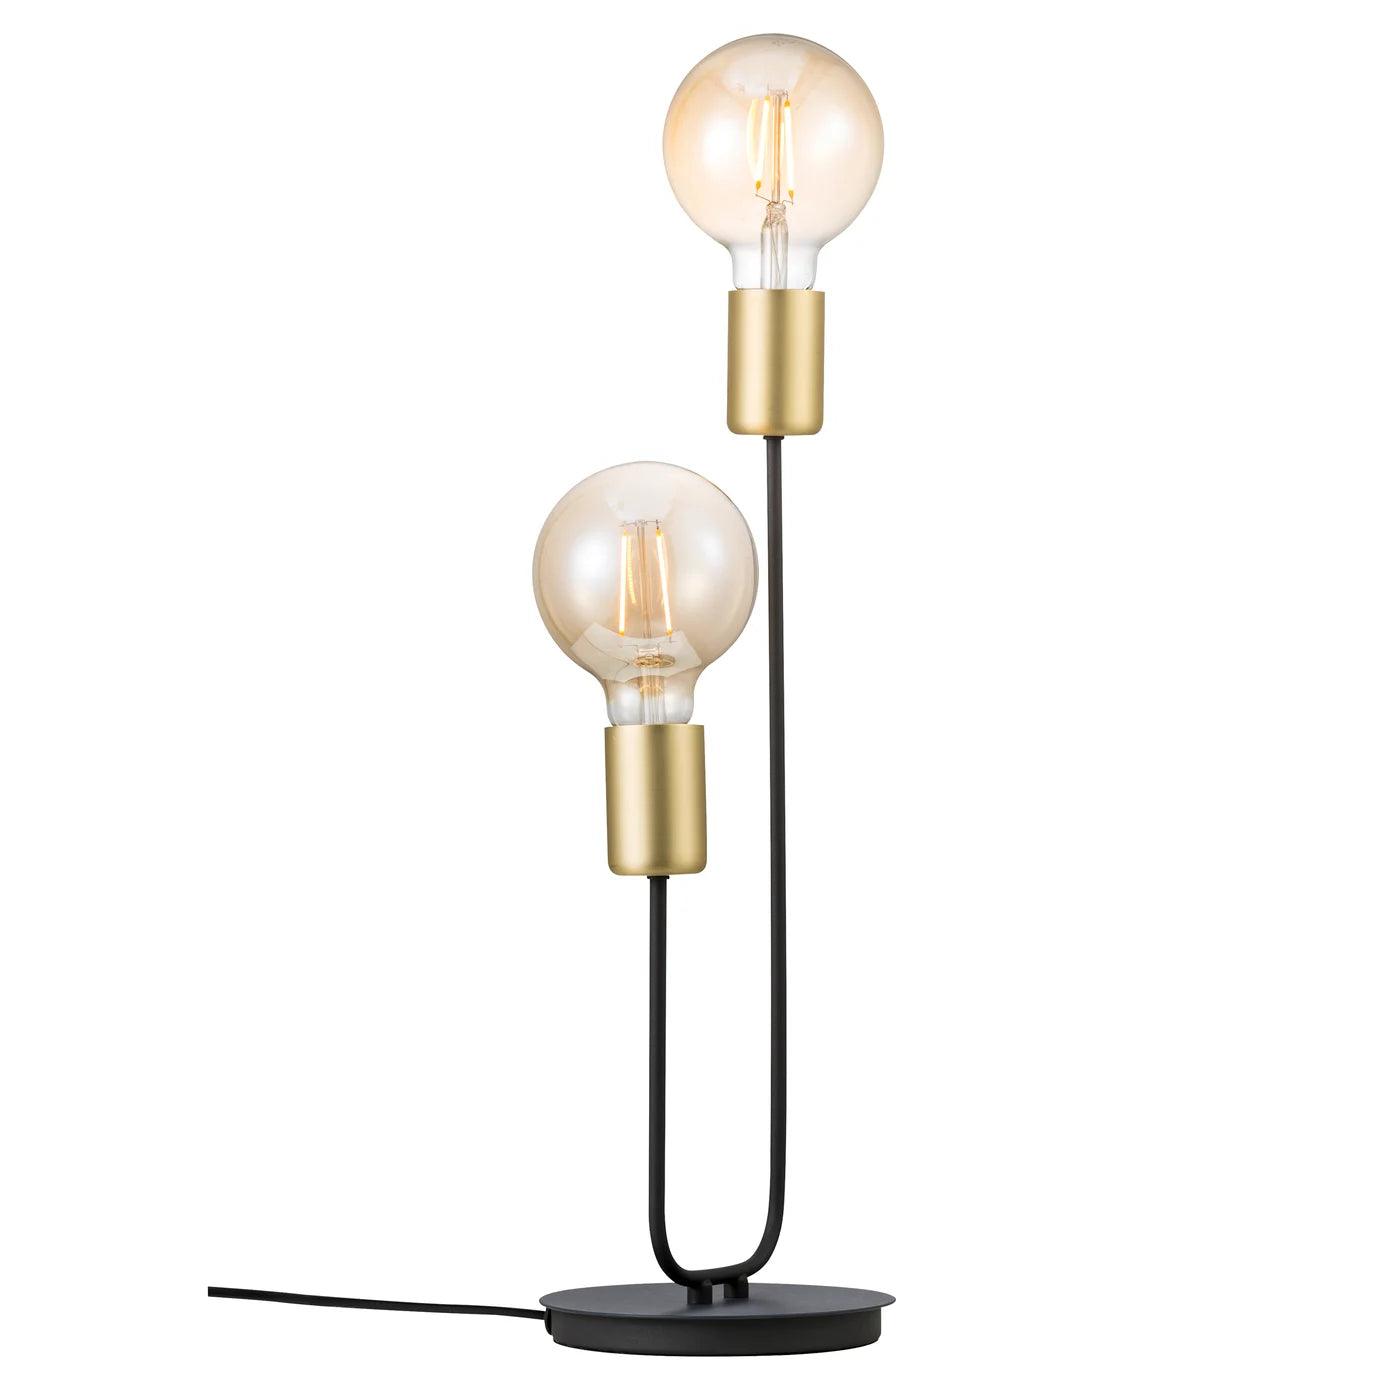 JOSEFINE Table lamp black with gold details - Eye on Design